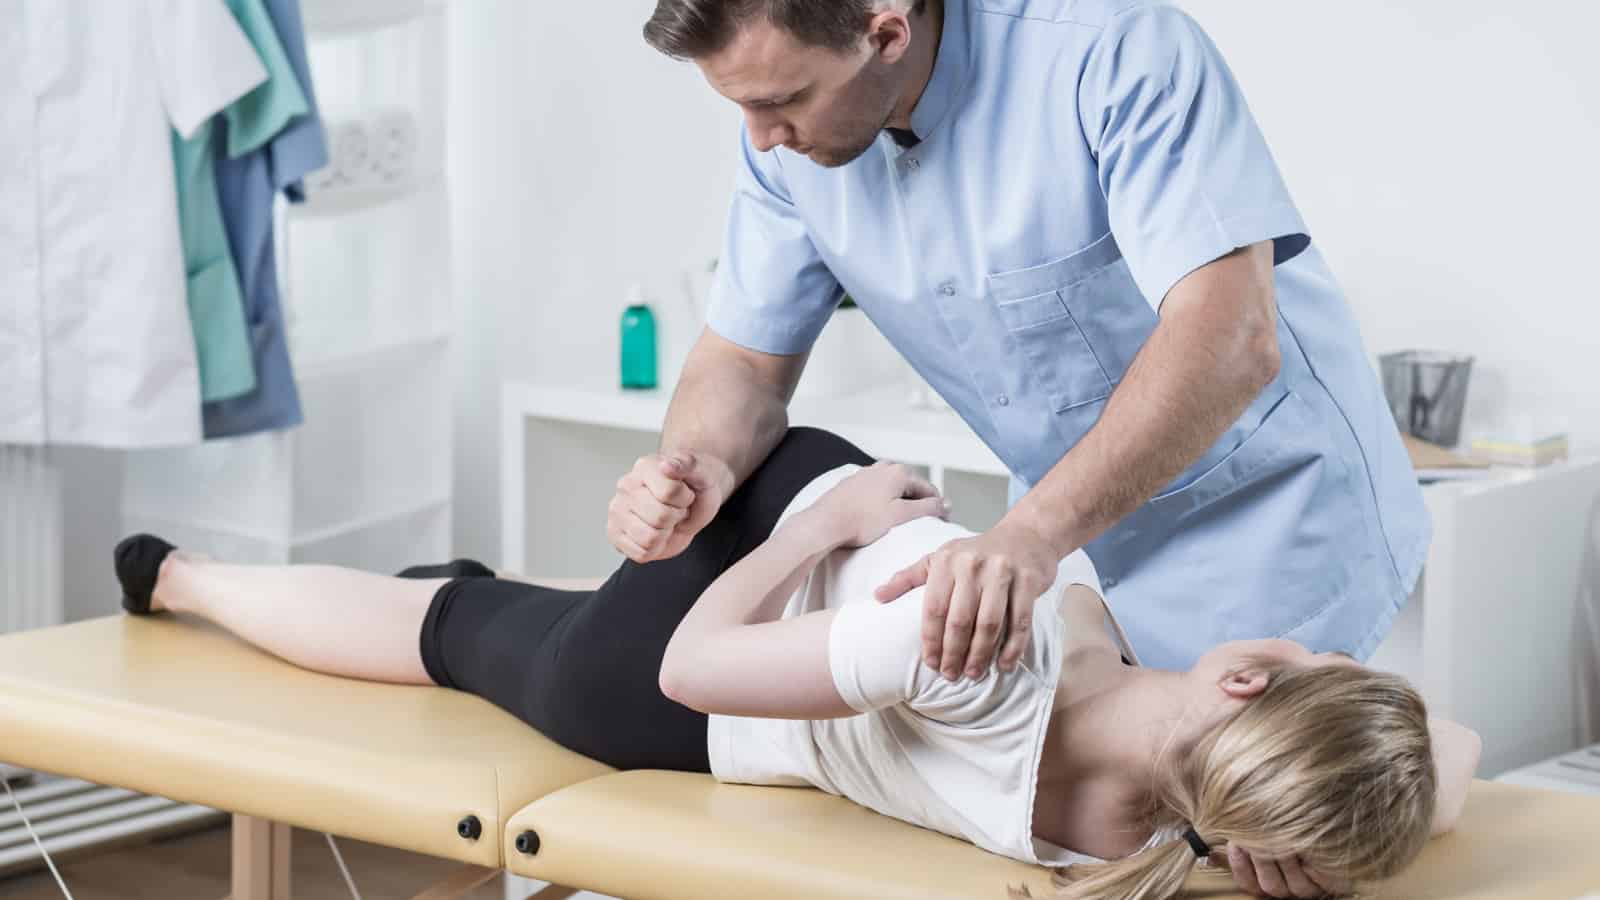 Frisco TX Chiropractic care services